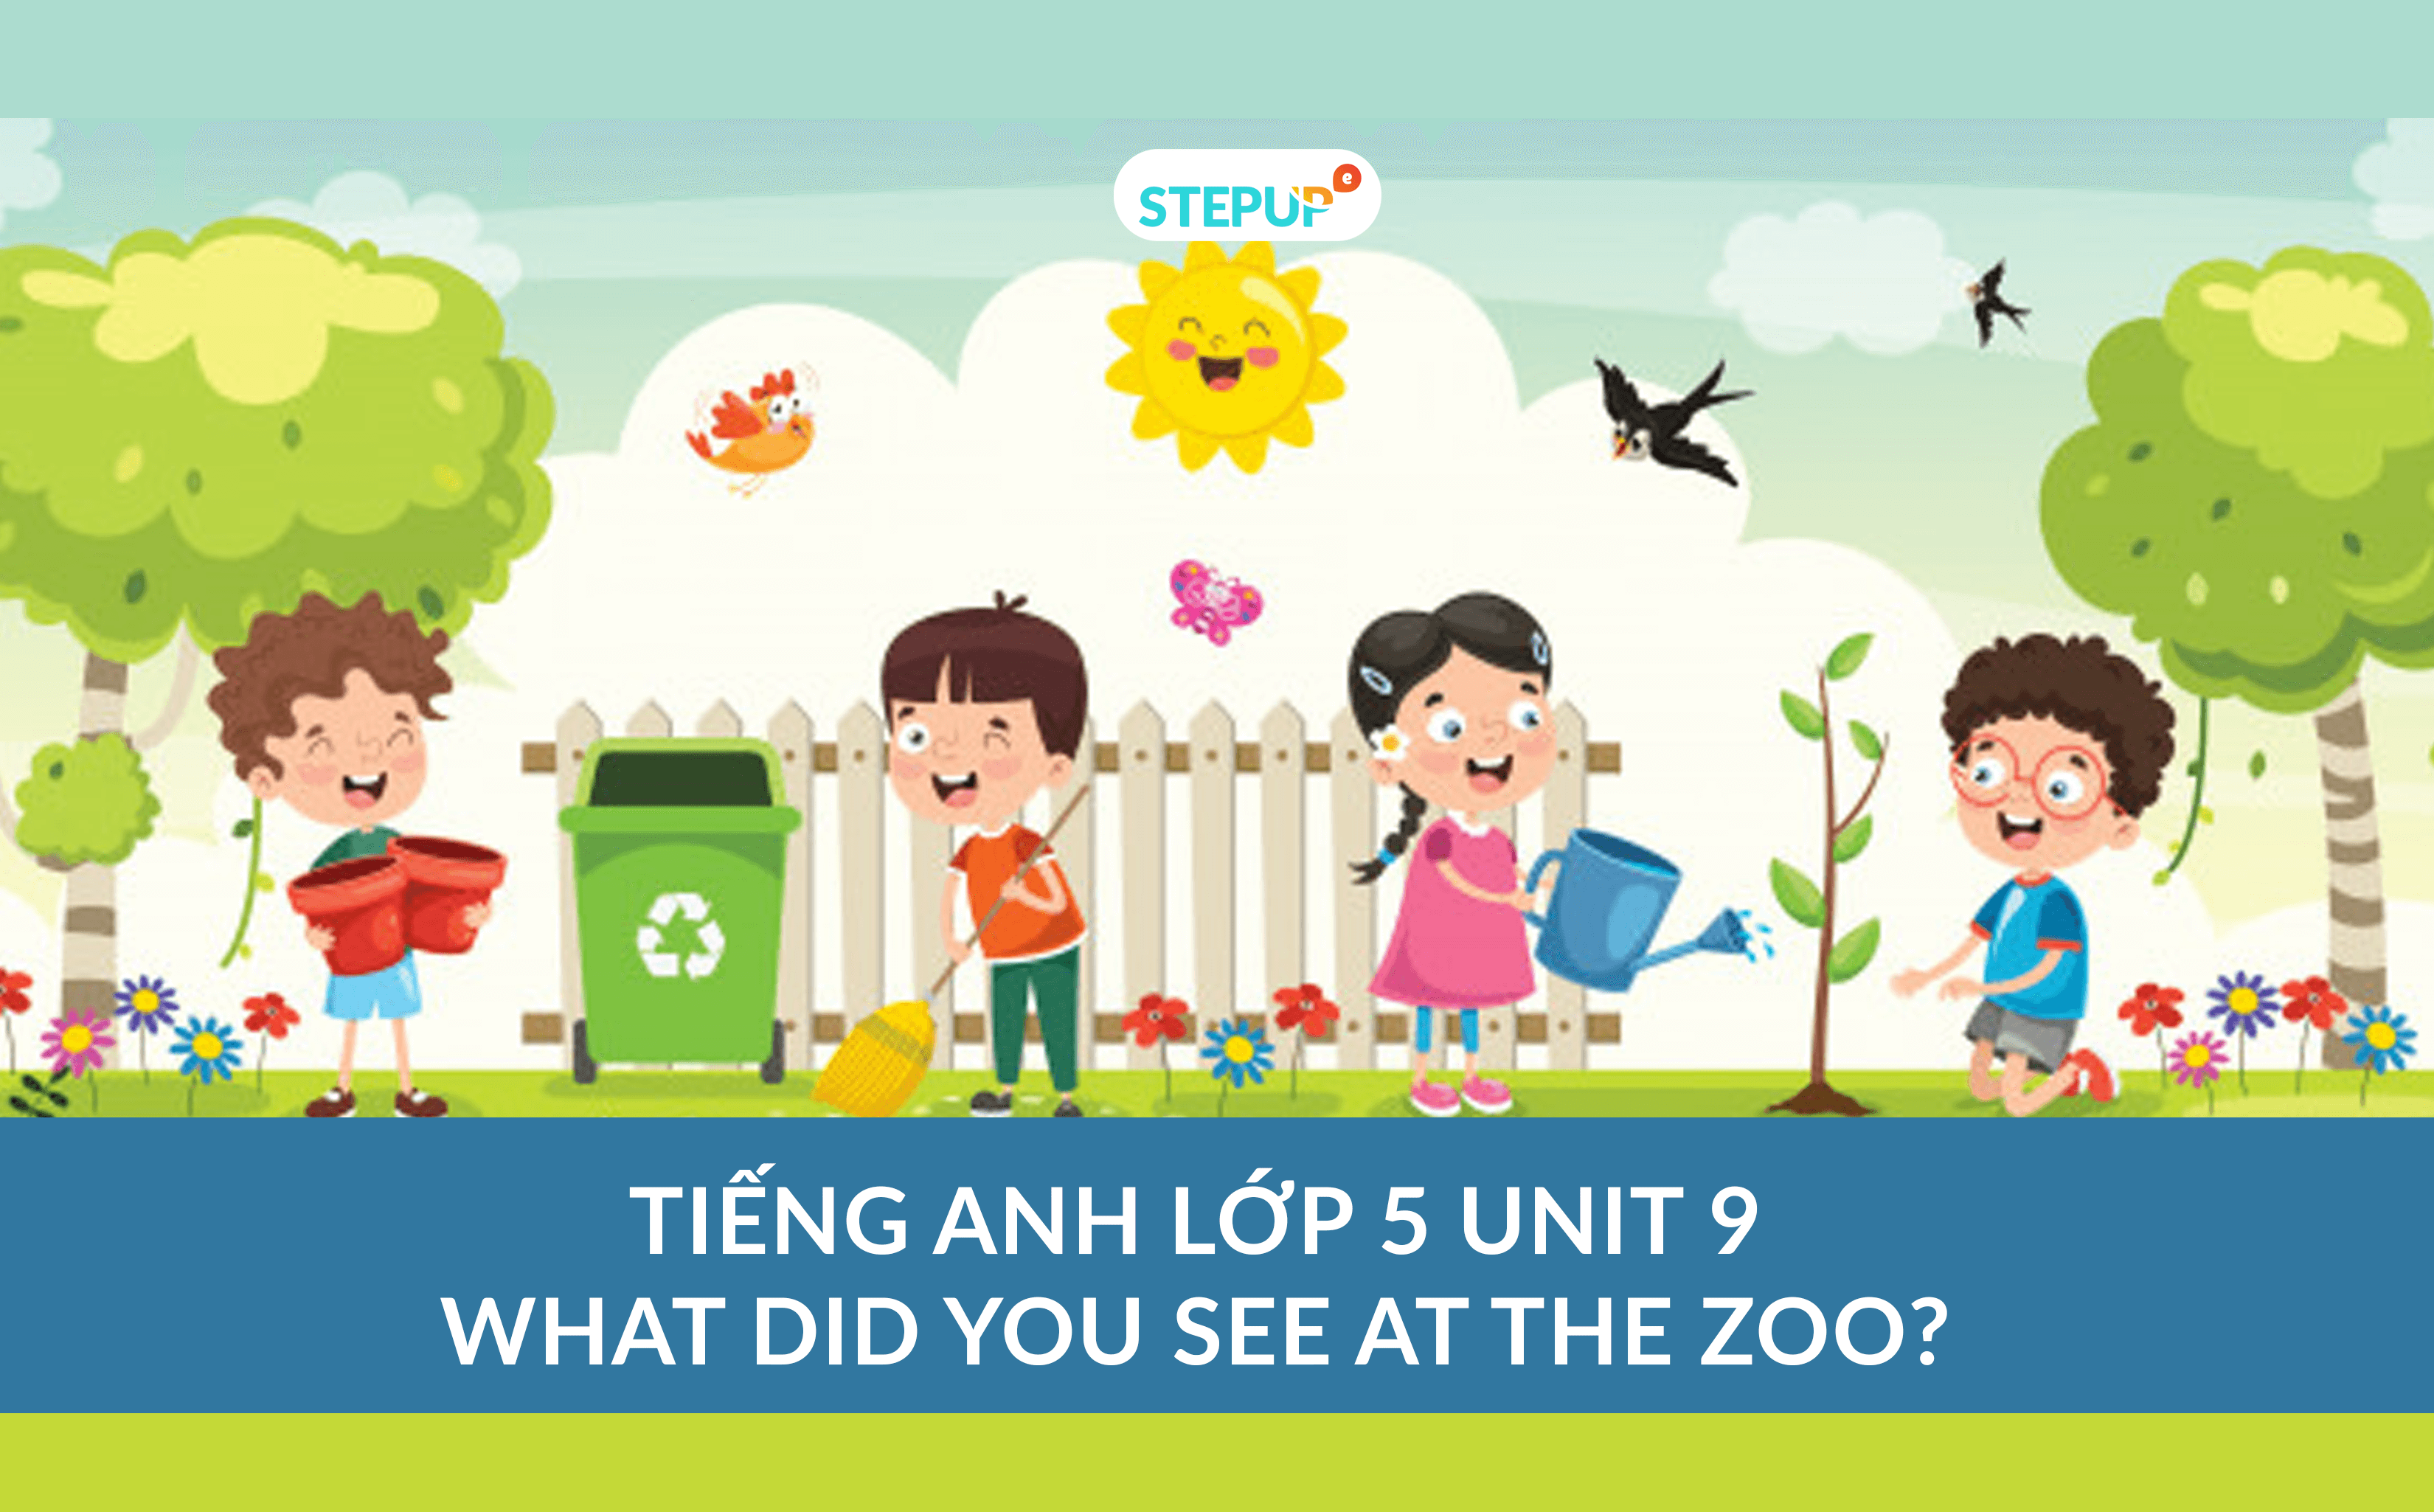 Tiếng Anh lớp 5 unit 9 - What Did You See At The Zoo?